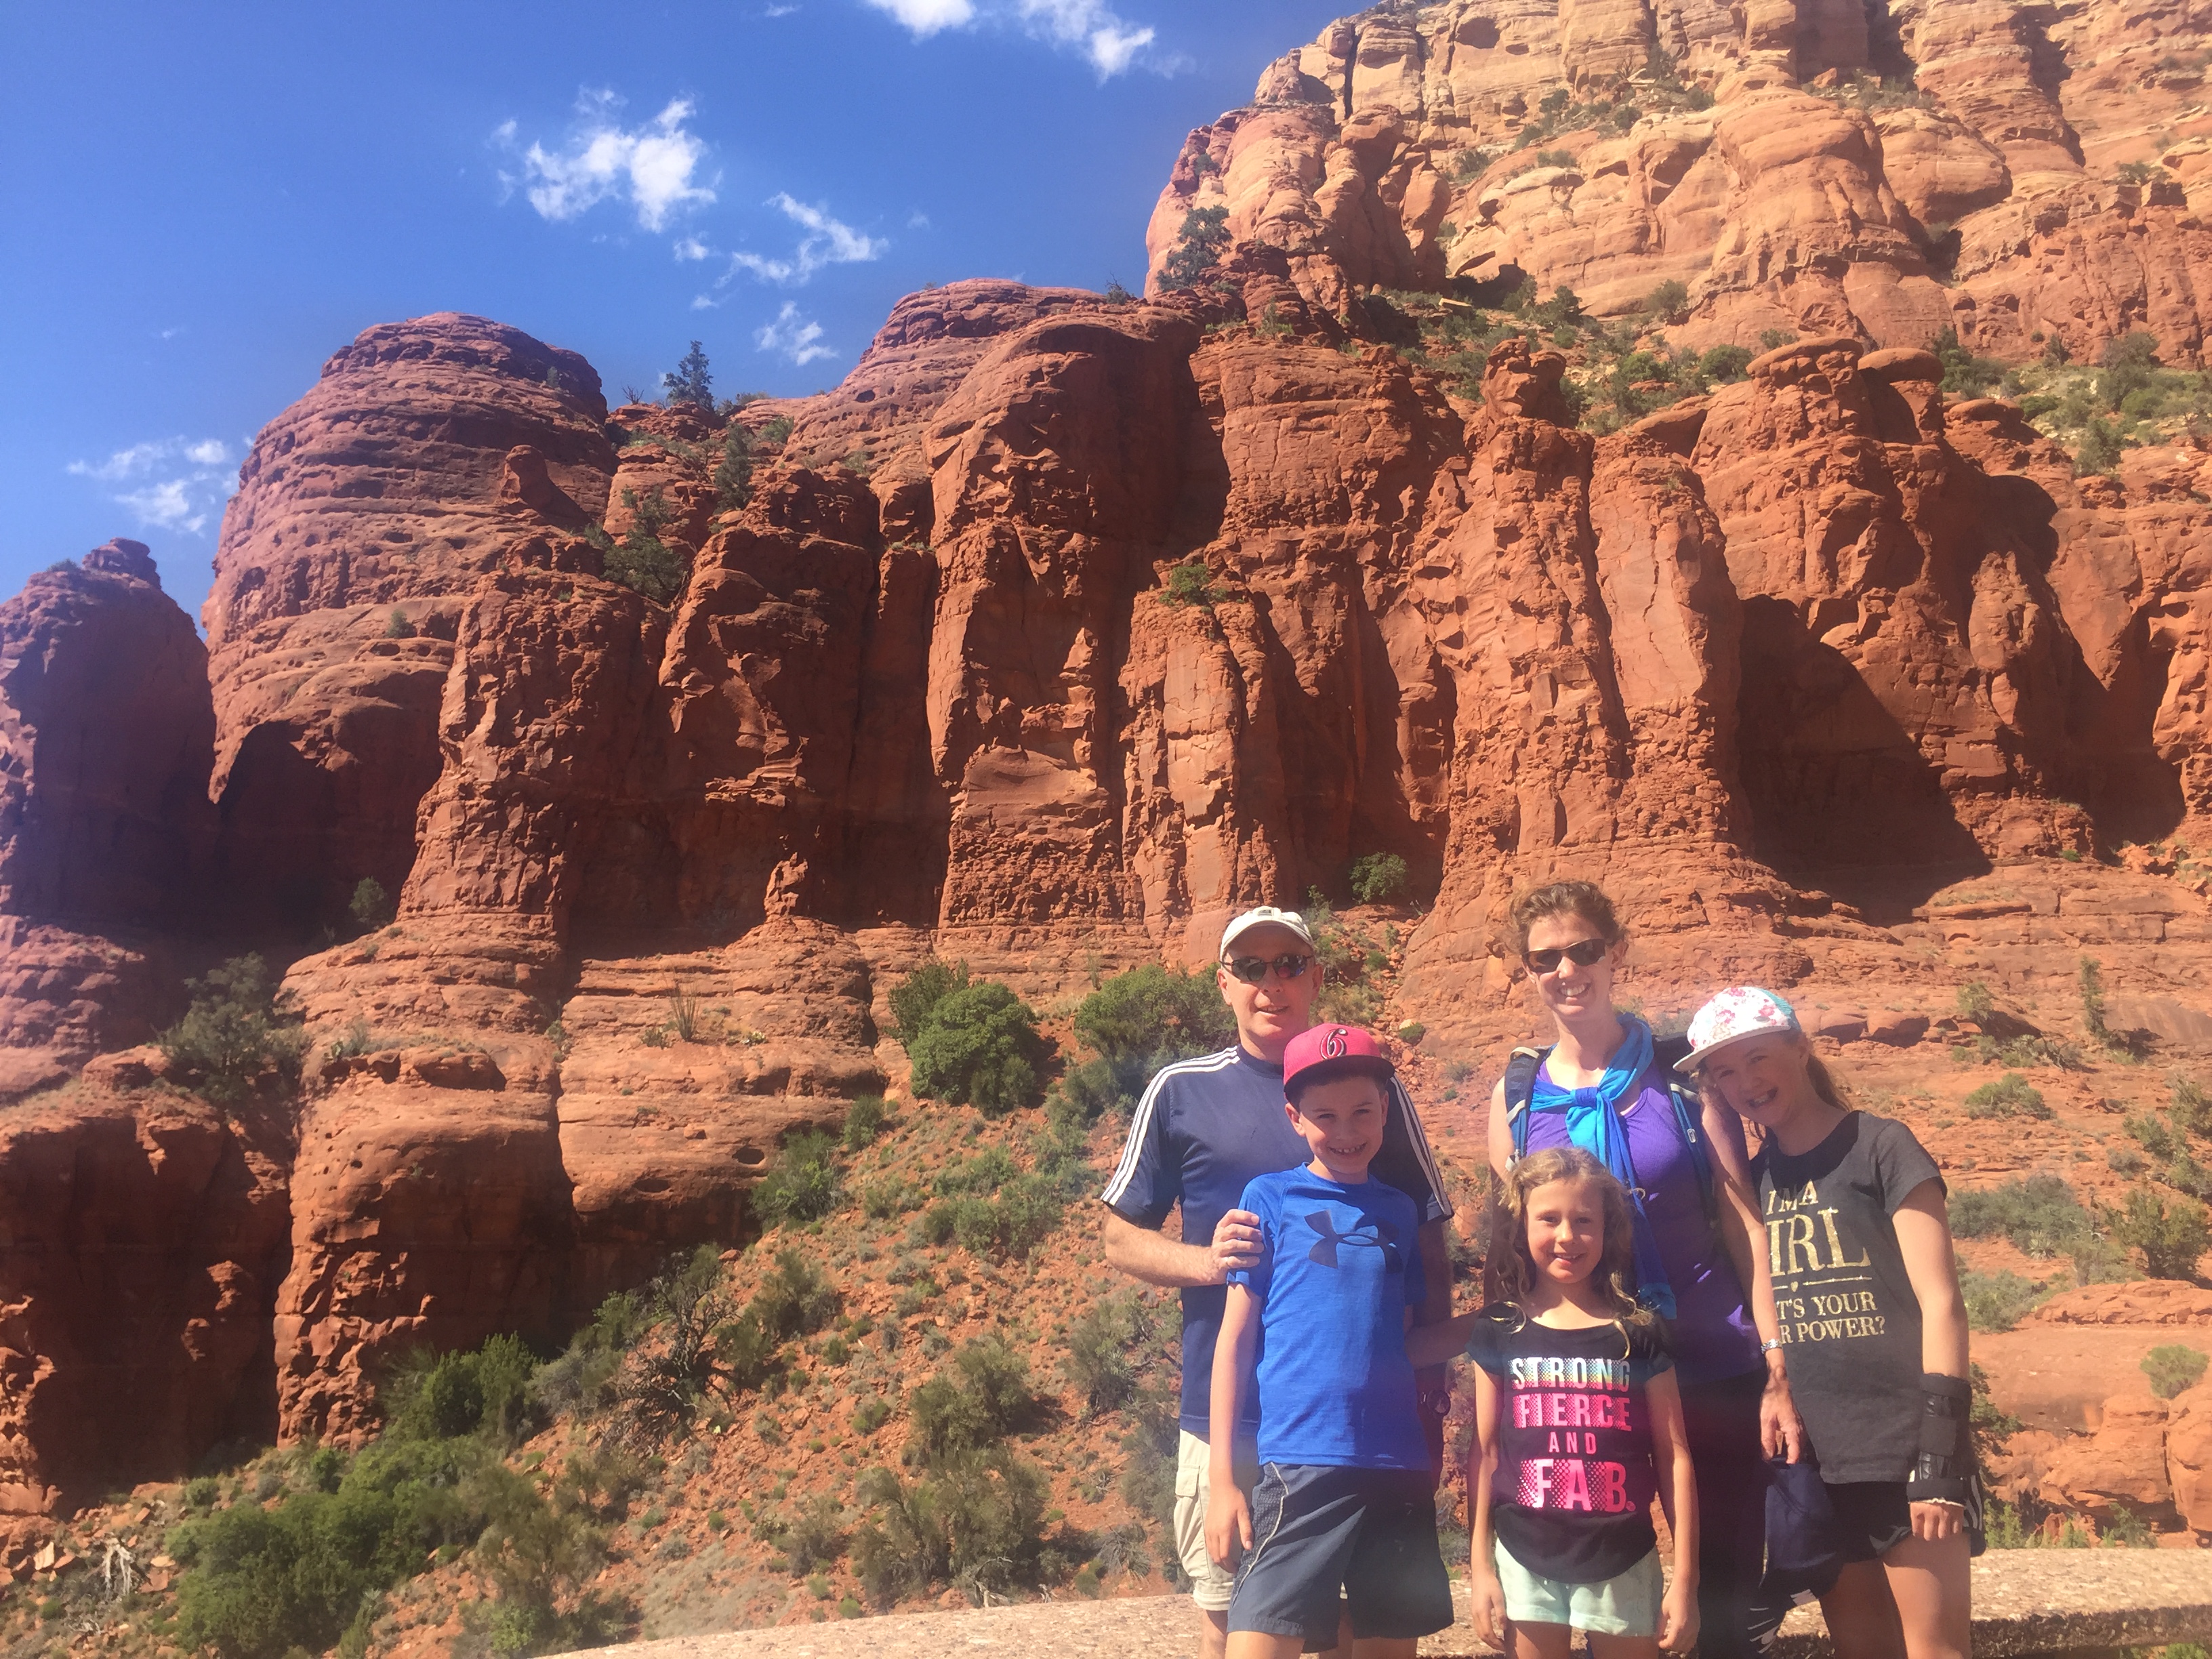 Travel with Kids: 5 Things To Do In Sedona